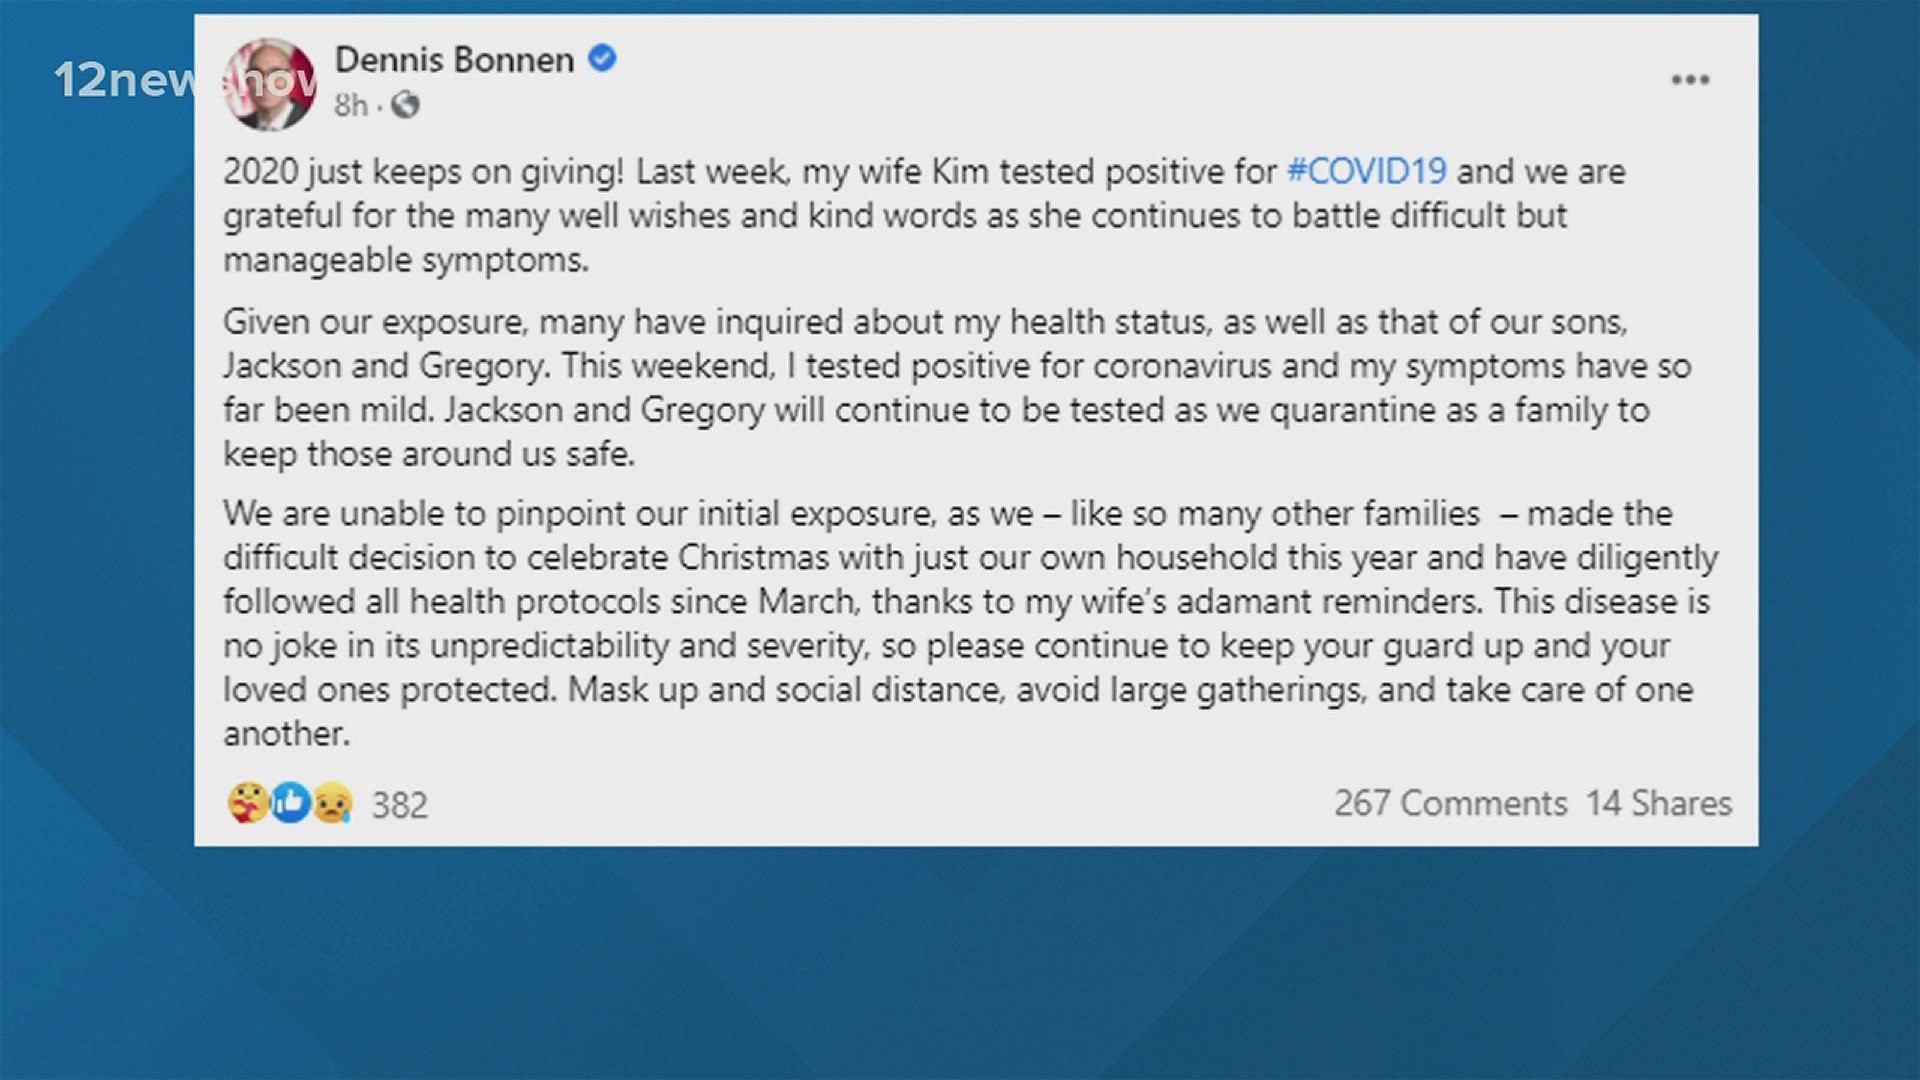 "2020 just keeps on giving!" Bonnen wrote in a Facebook post confirming that he and his wife have both tested positive for the virus.